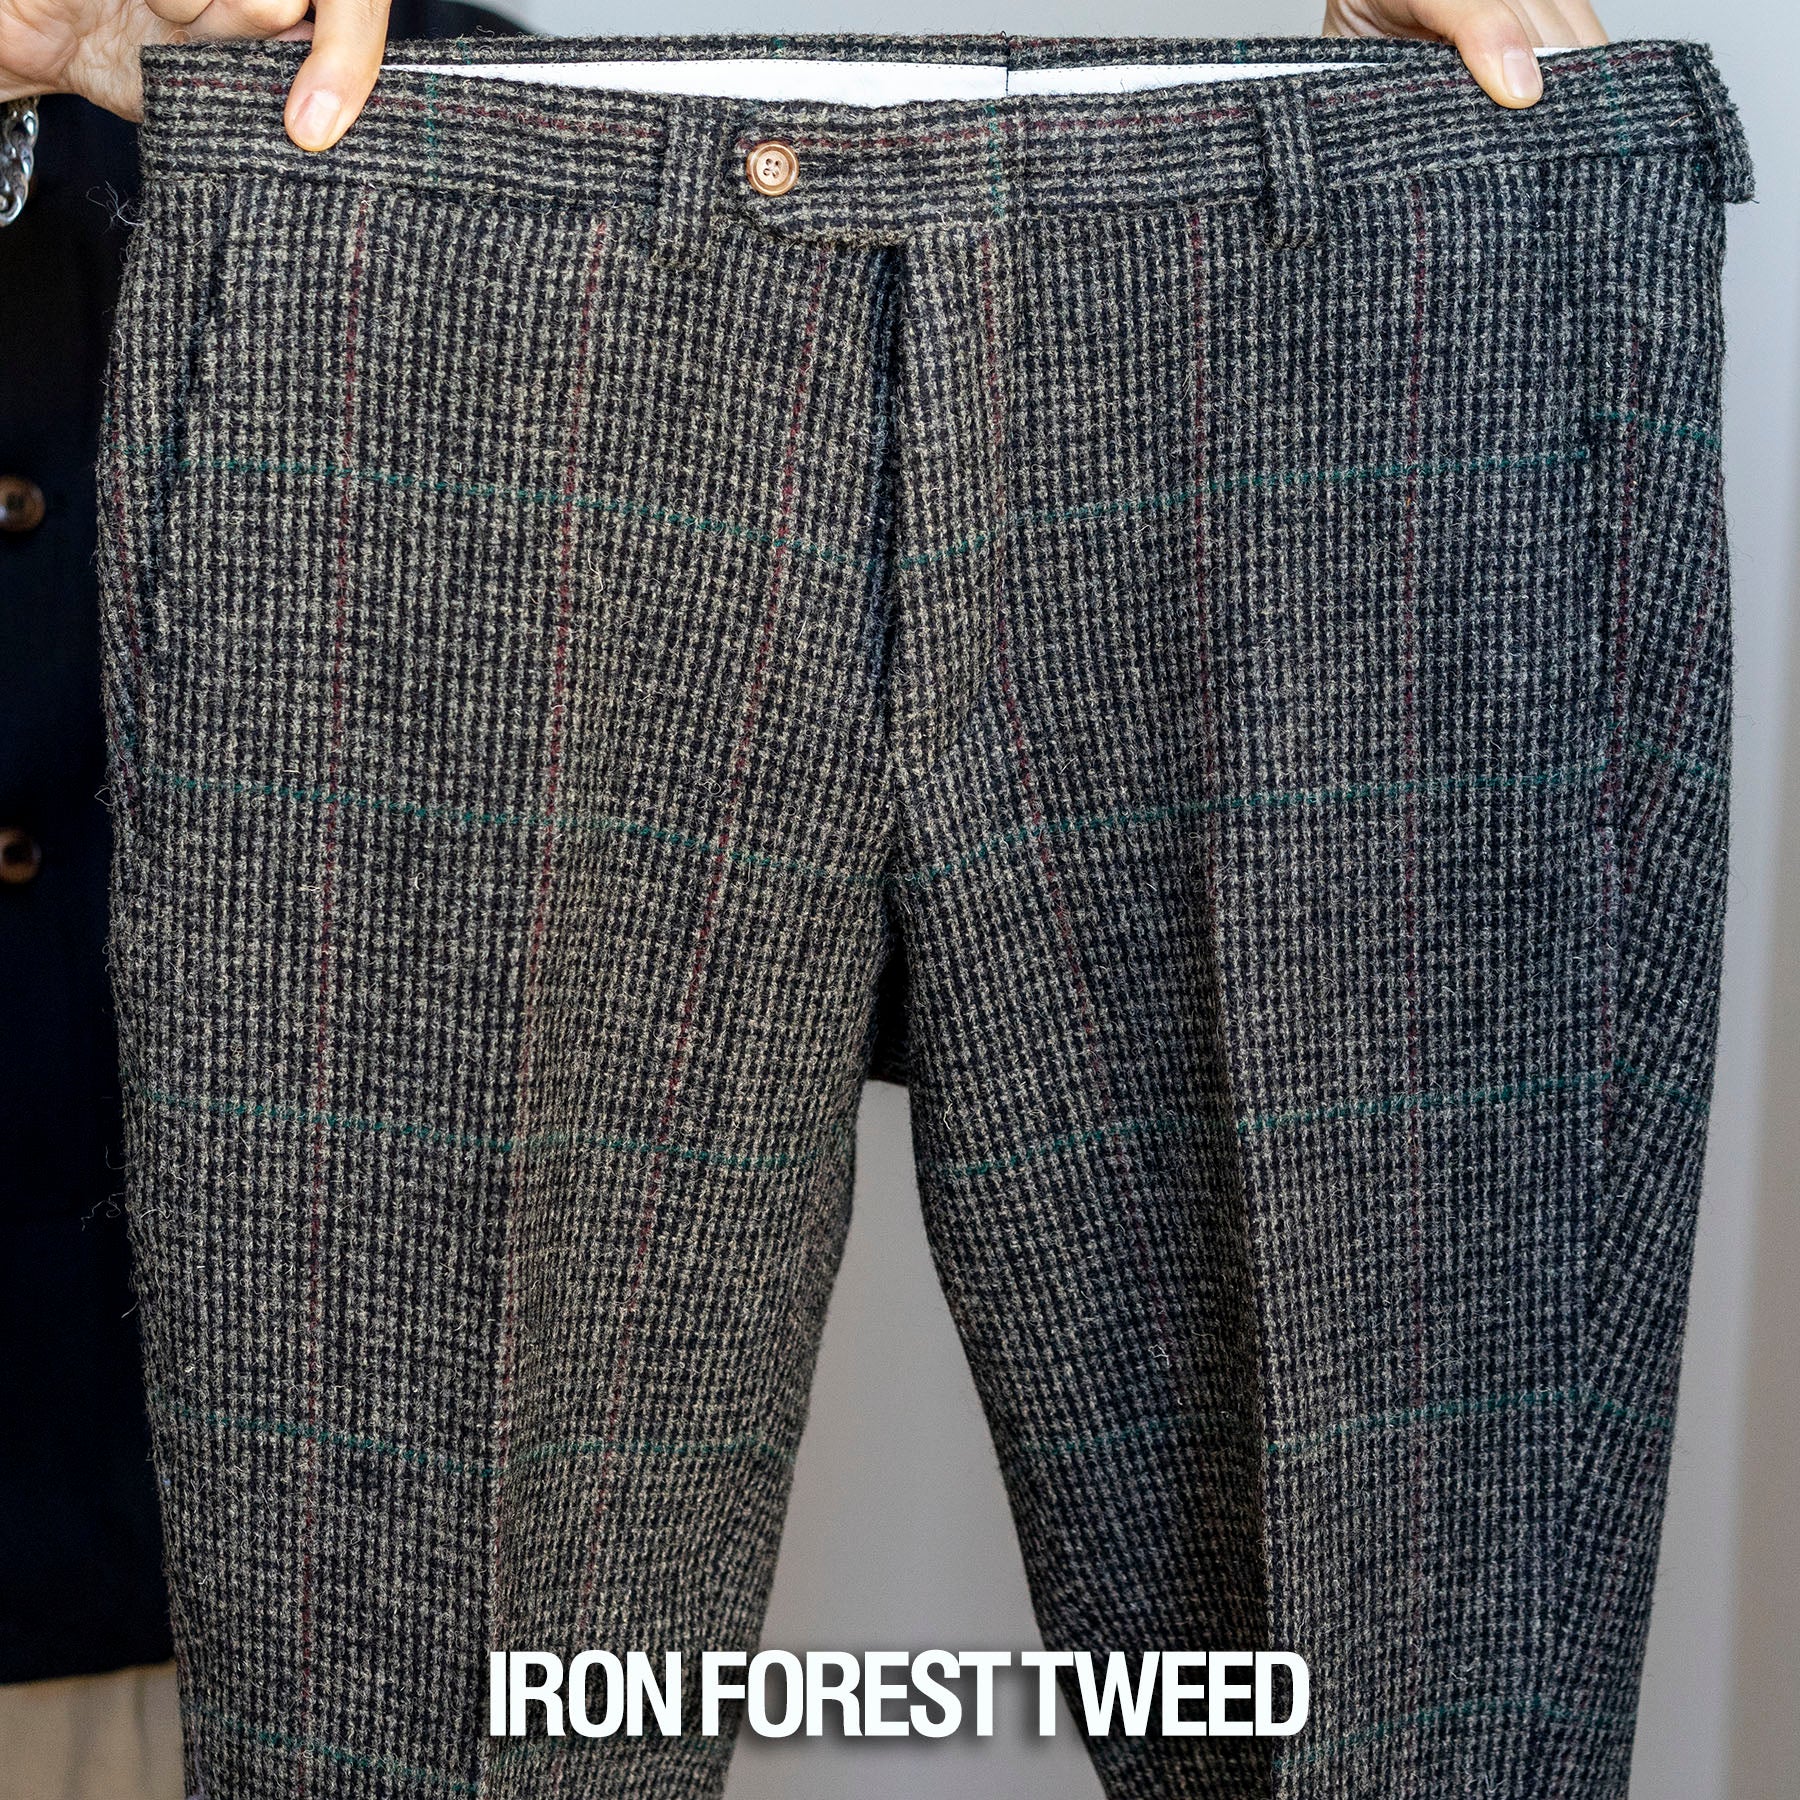 Custom Trousers in Gallowglas & Iron Forest Tweed